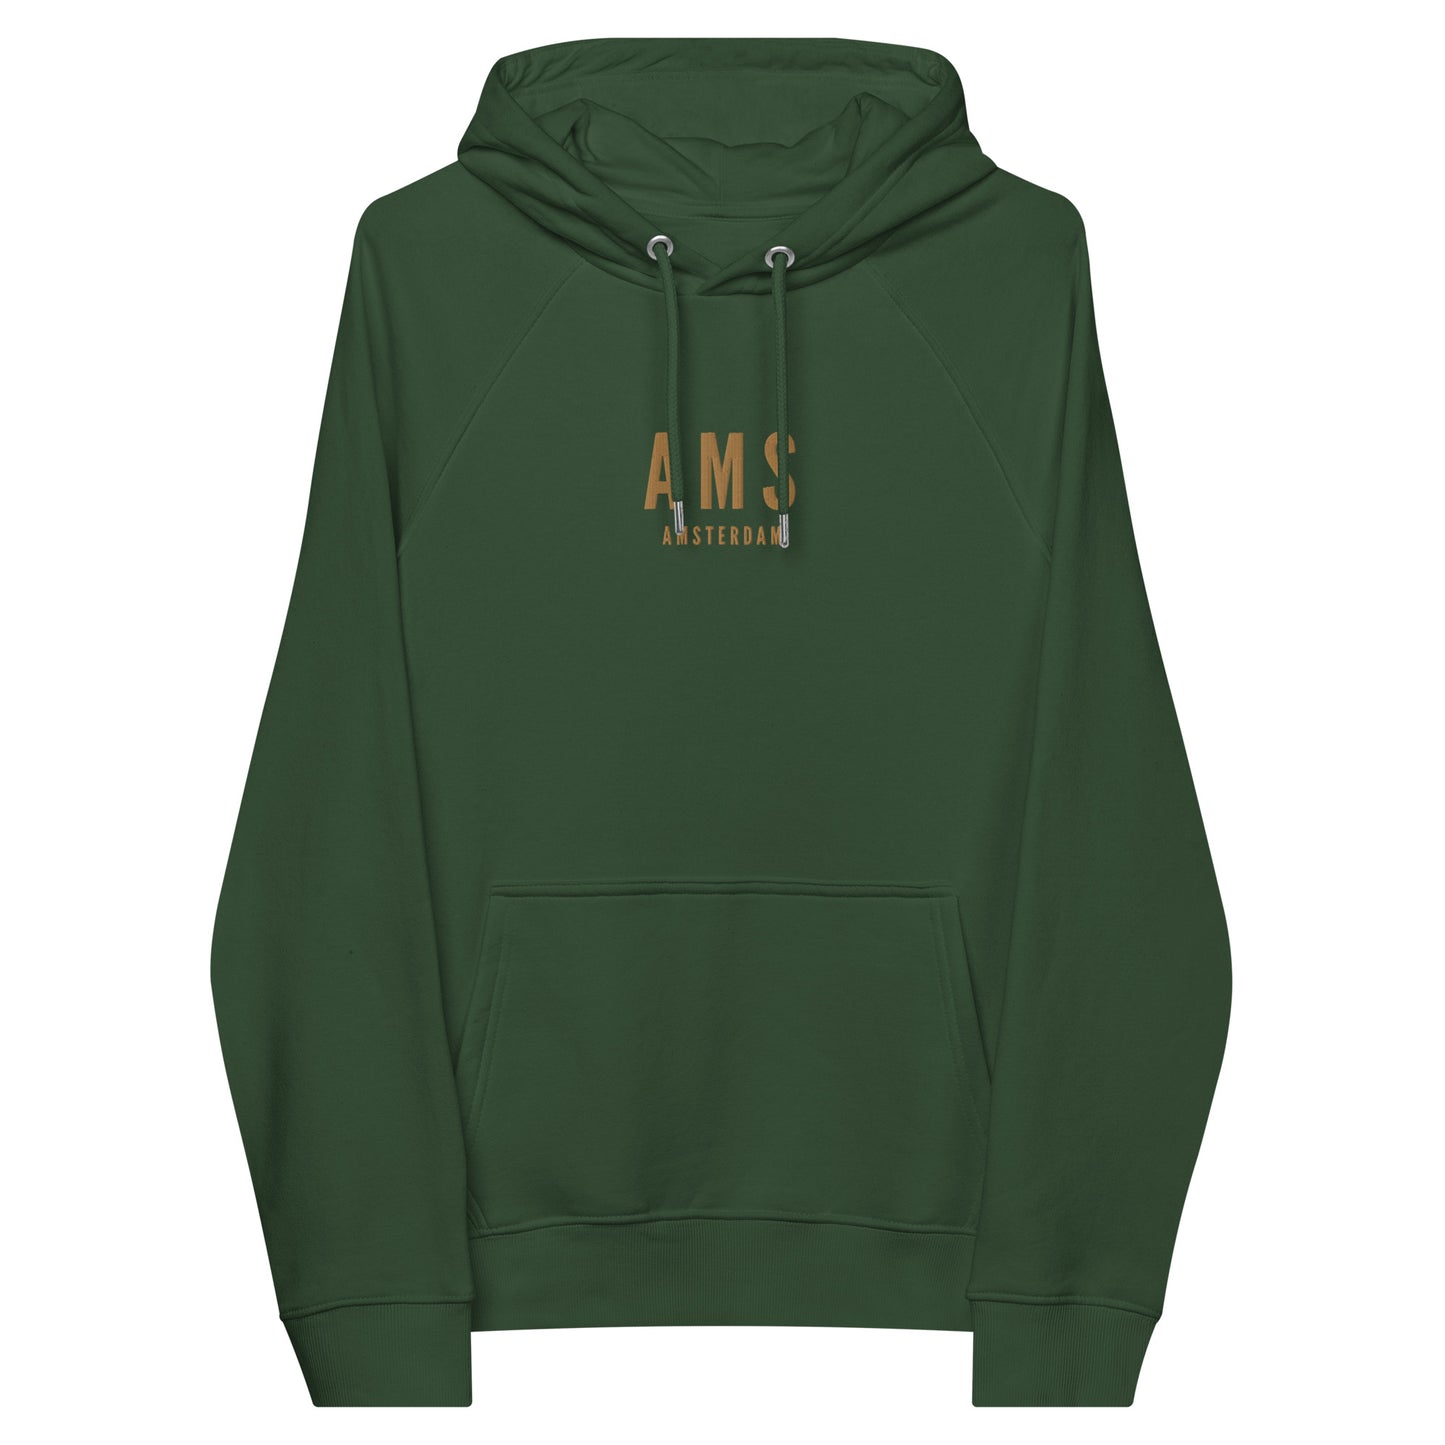 City Organic Hoodie - Old Gold • AMS Amsterdam • YHM Designs - Image 08